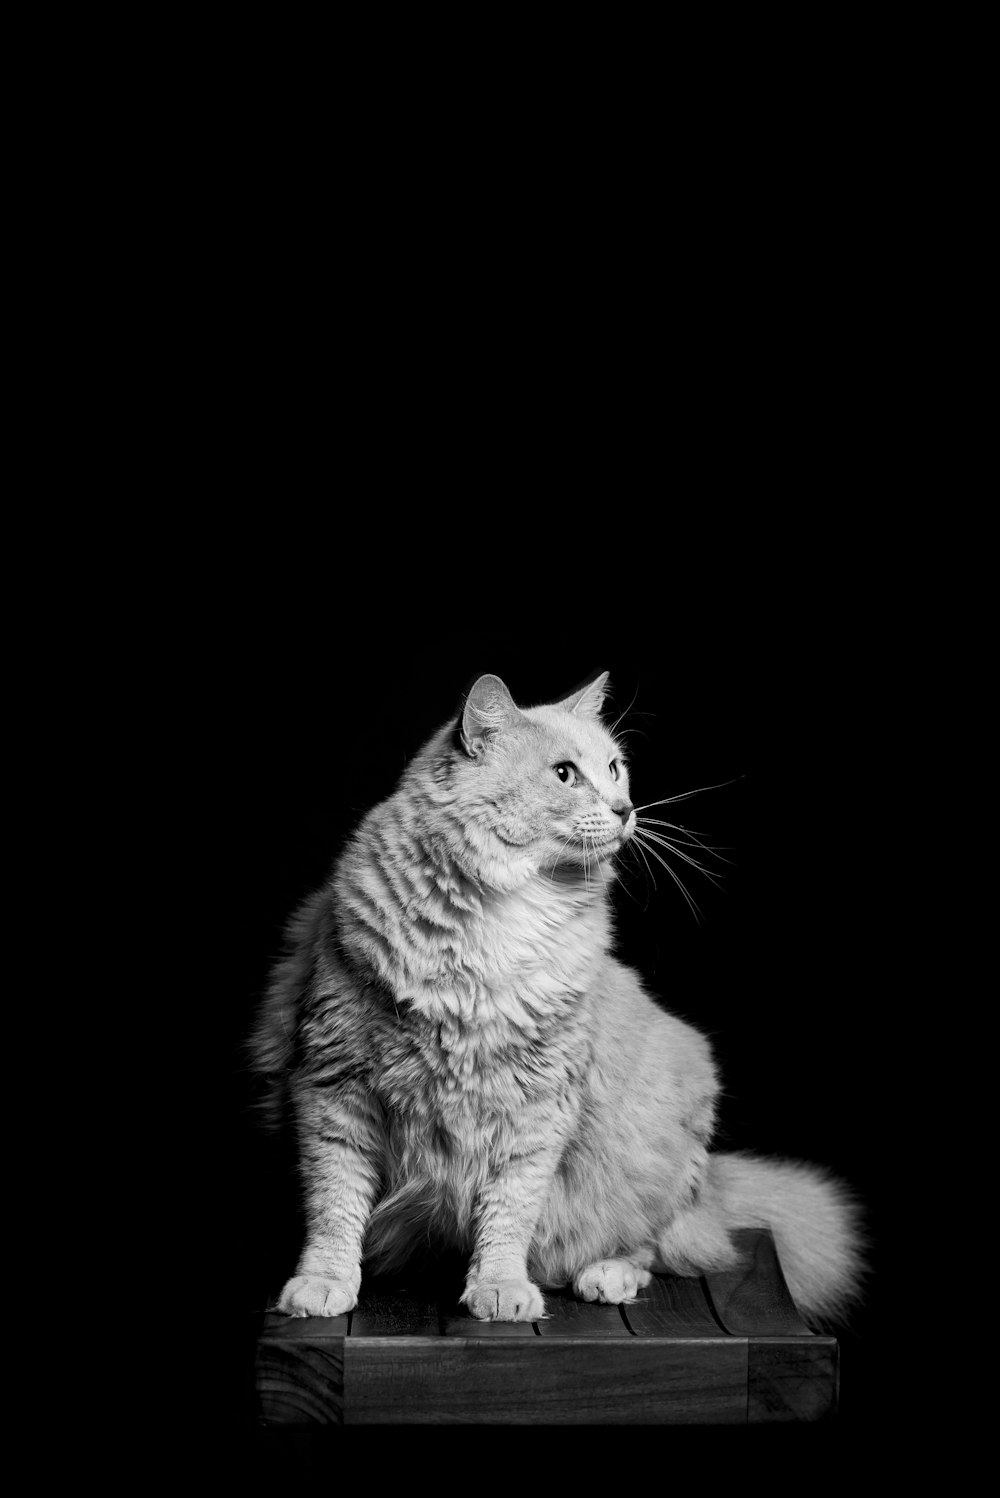 grayscale photo of cat on black background